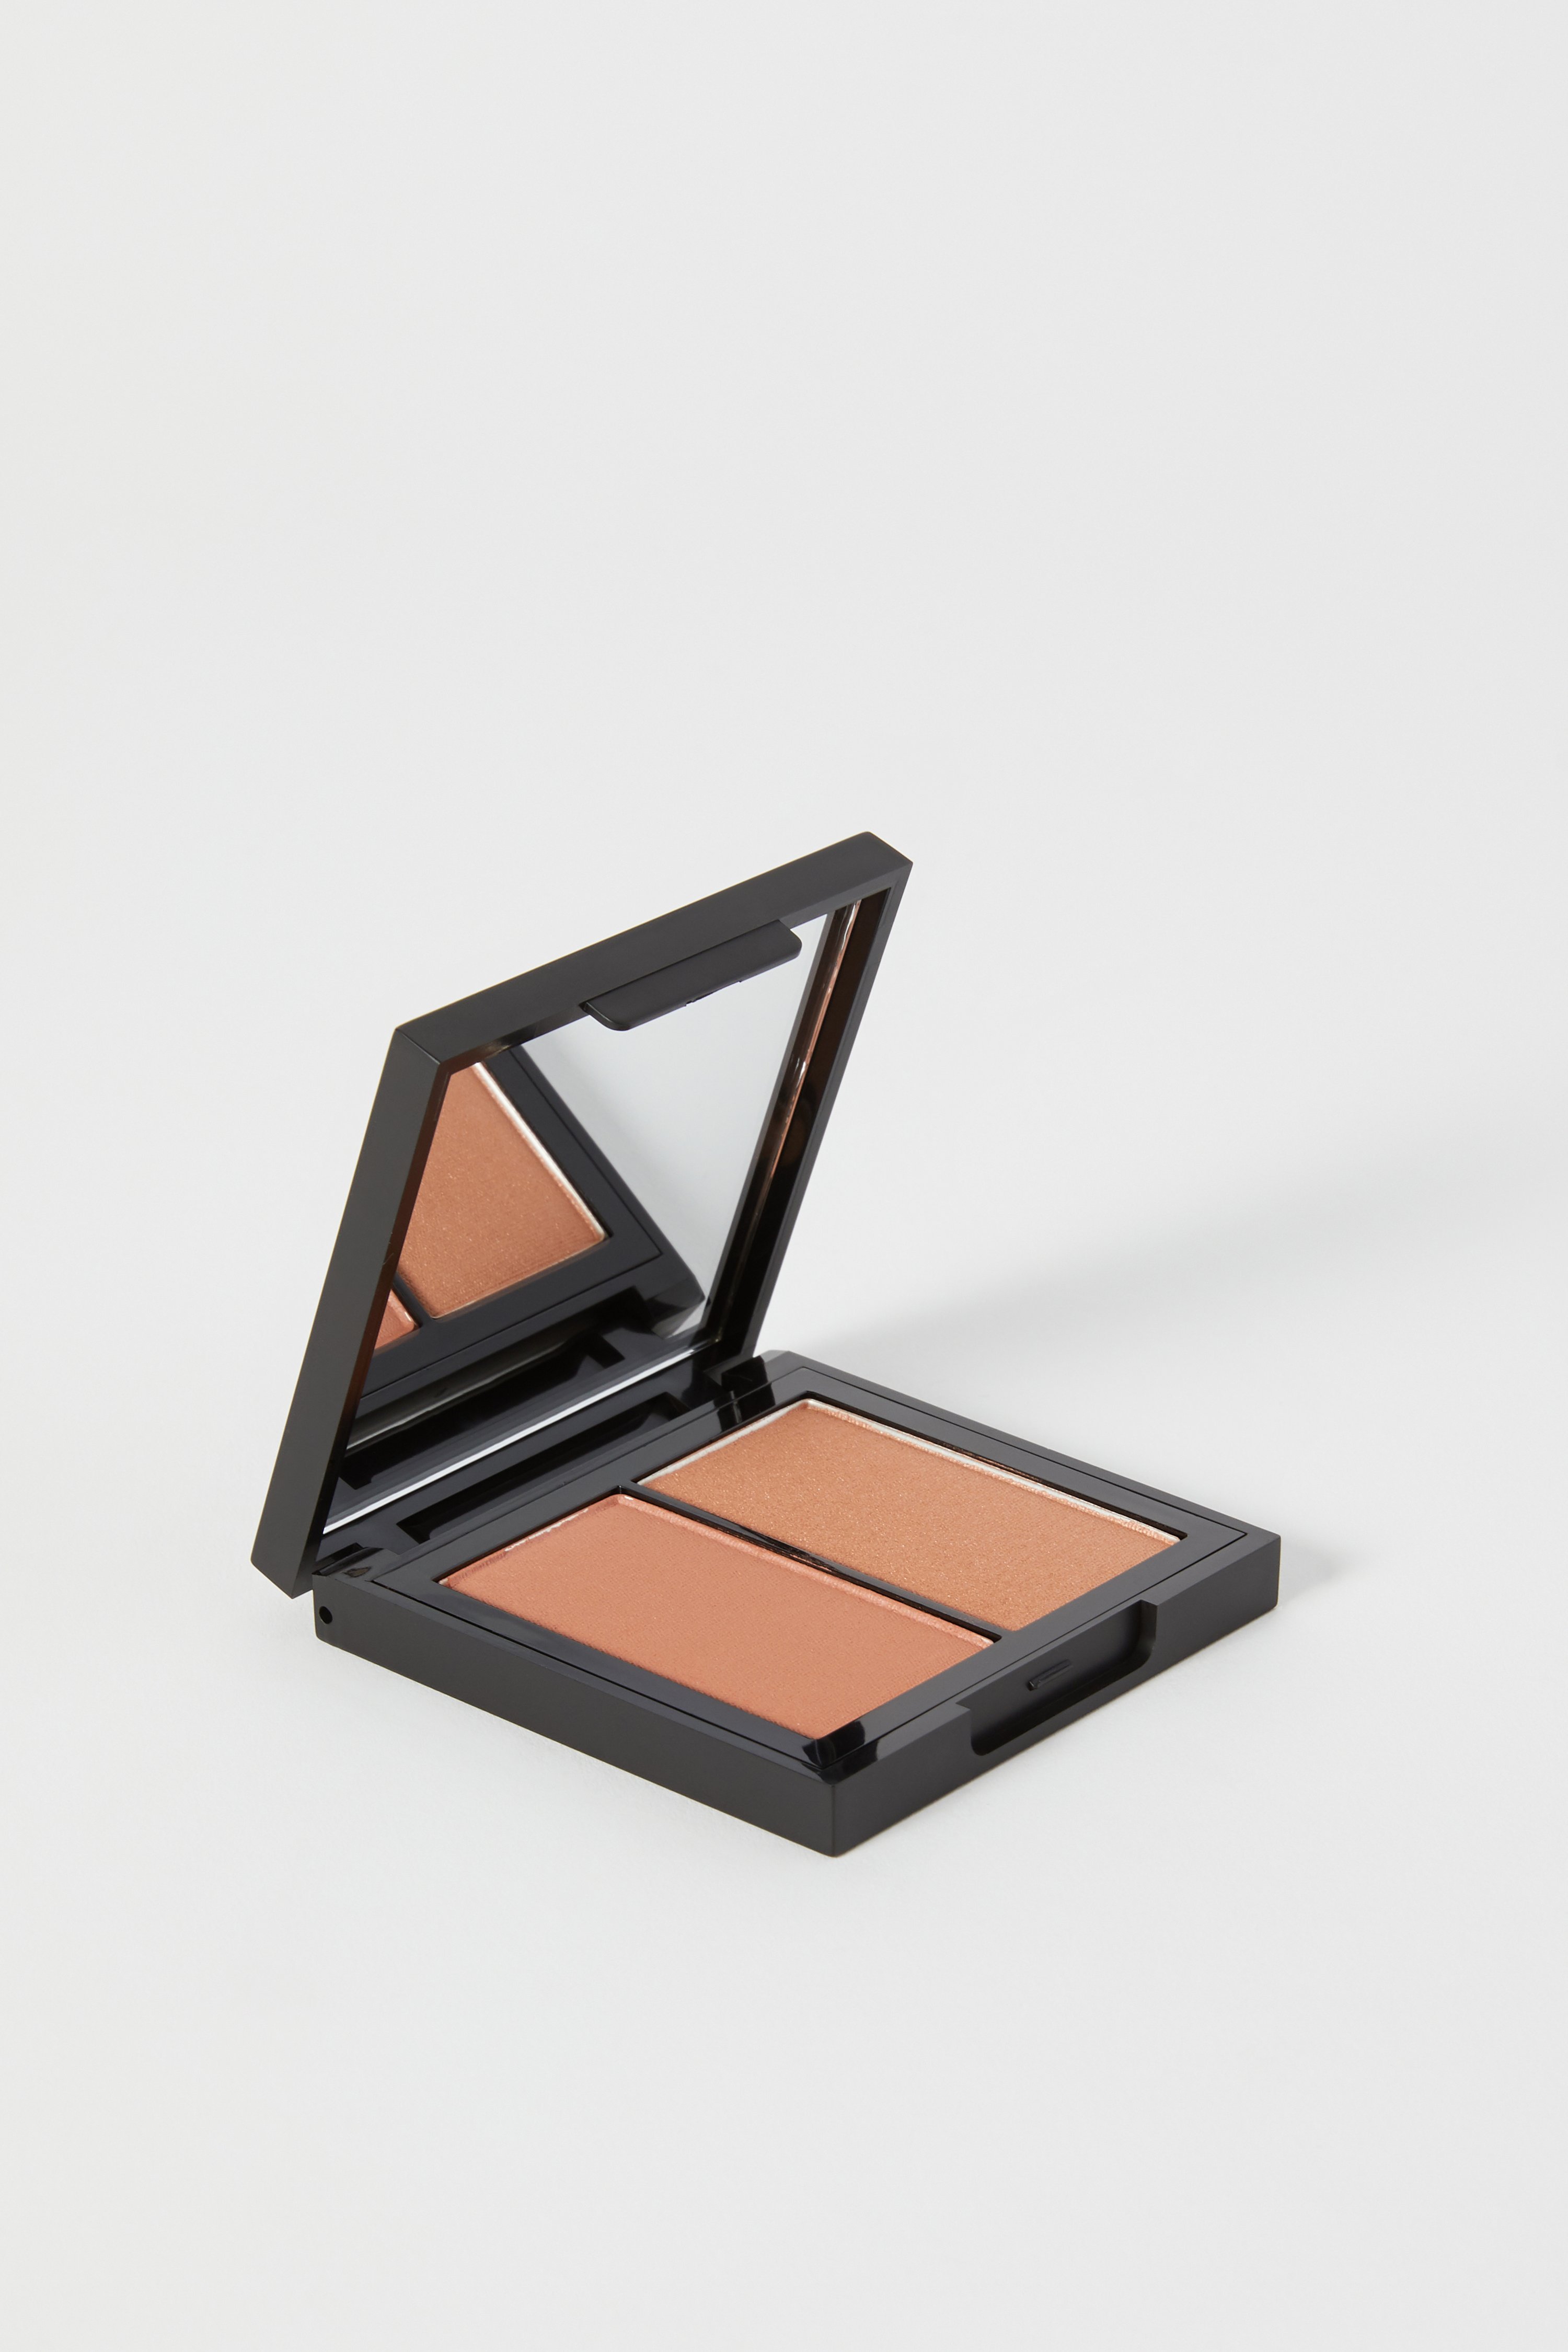 Kosas Color + Light Powder Duo In Contrachroma High Intensity